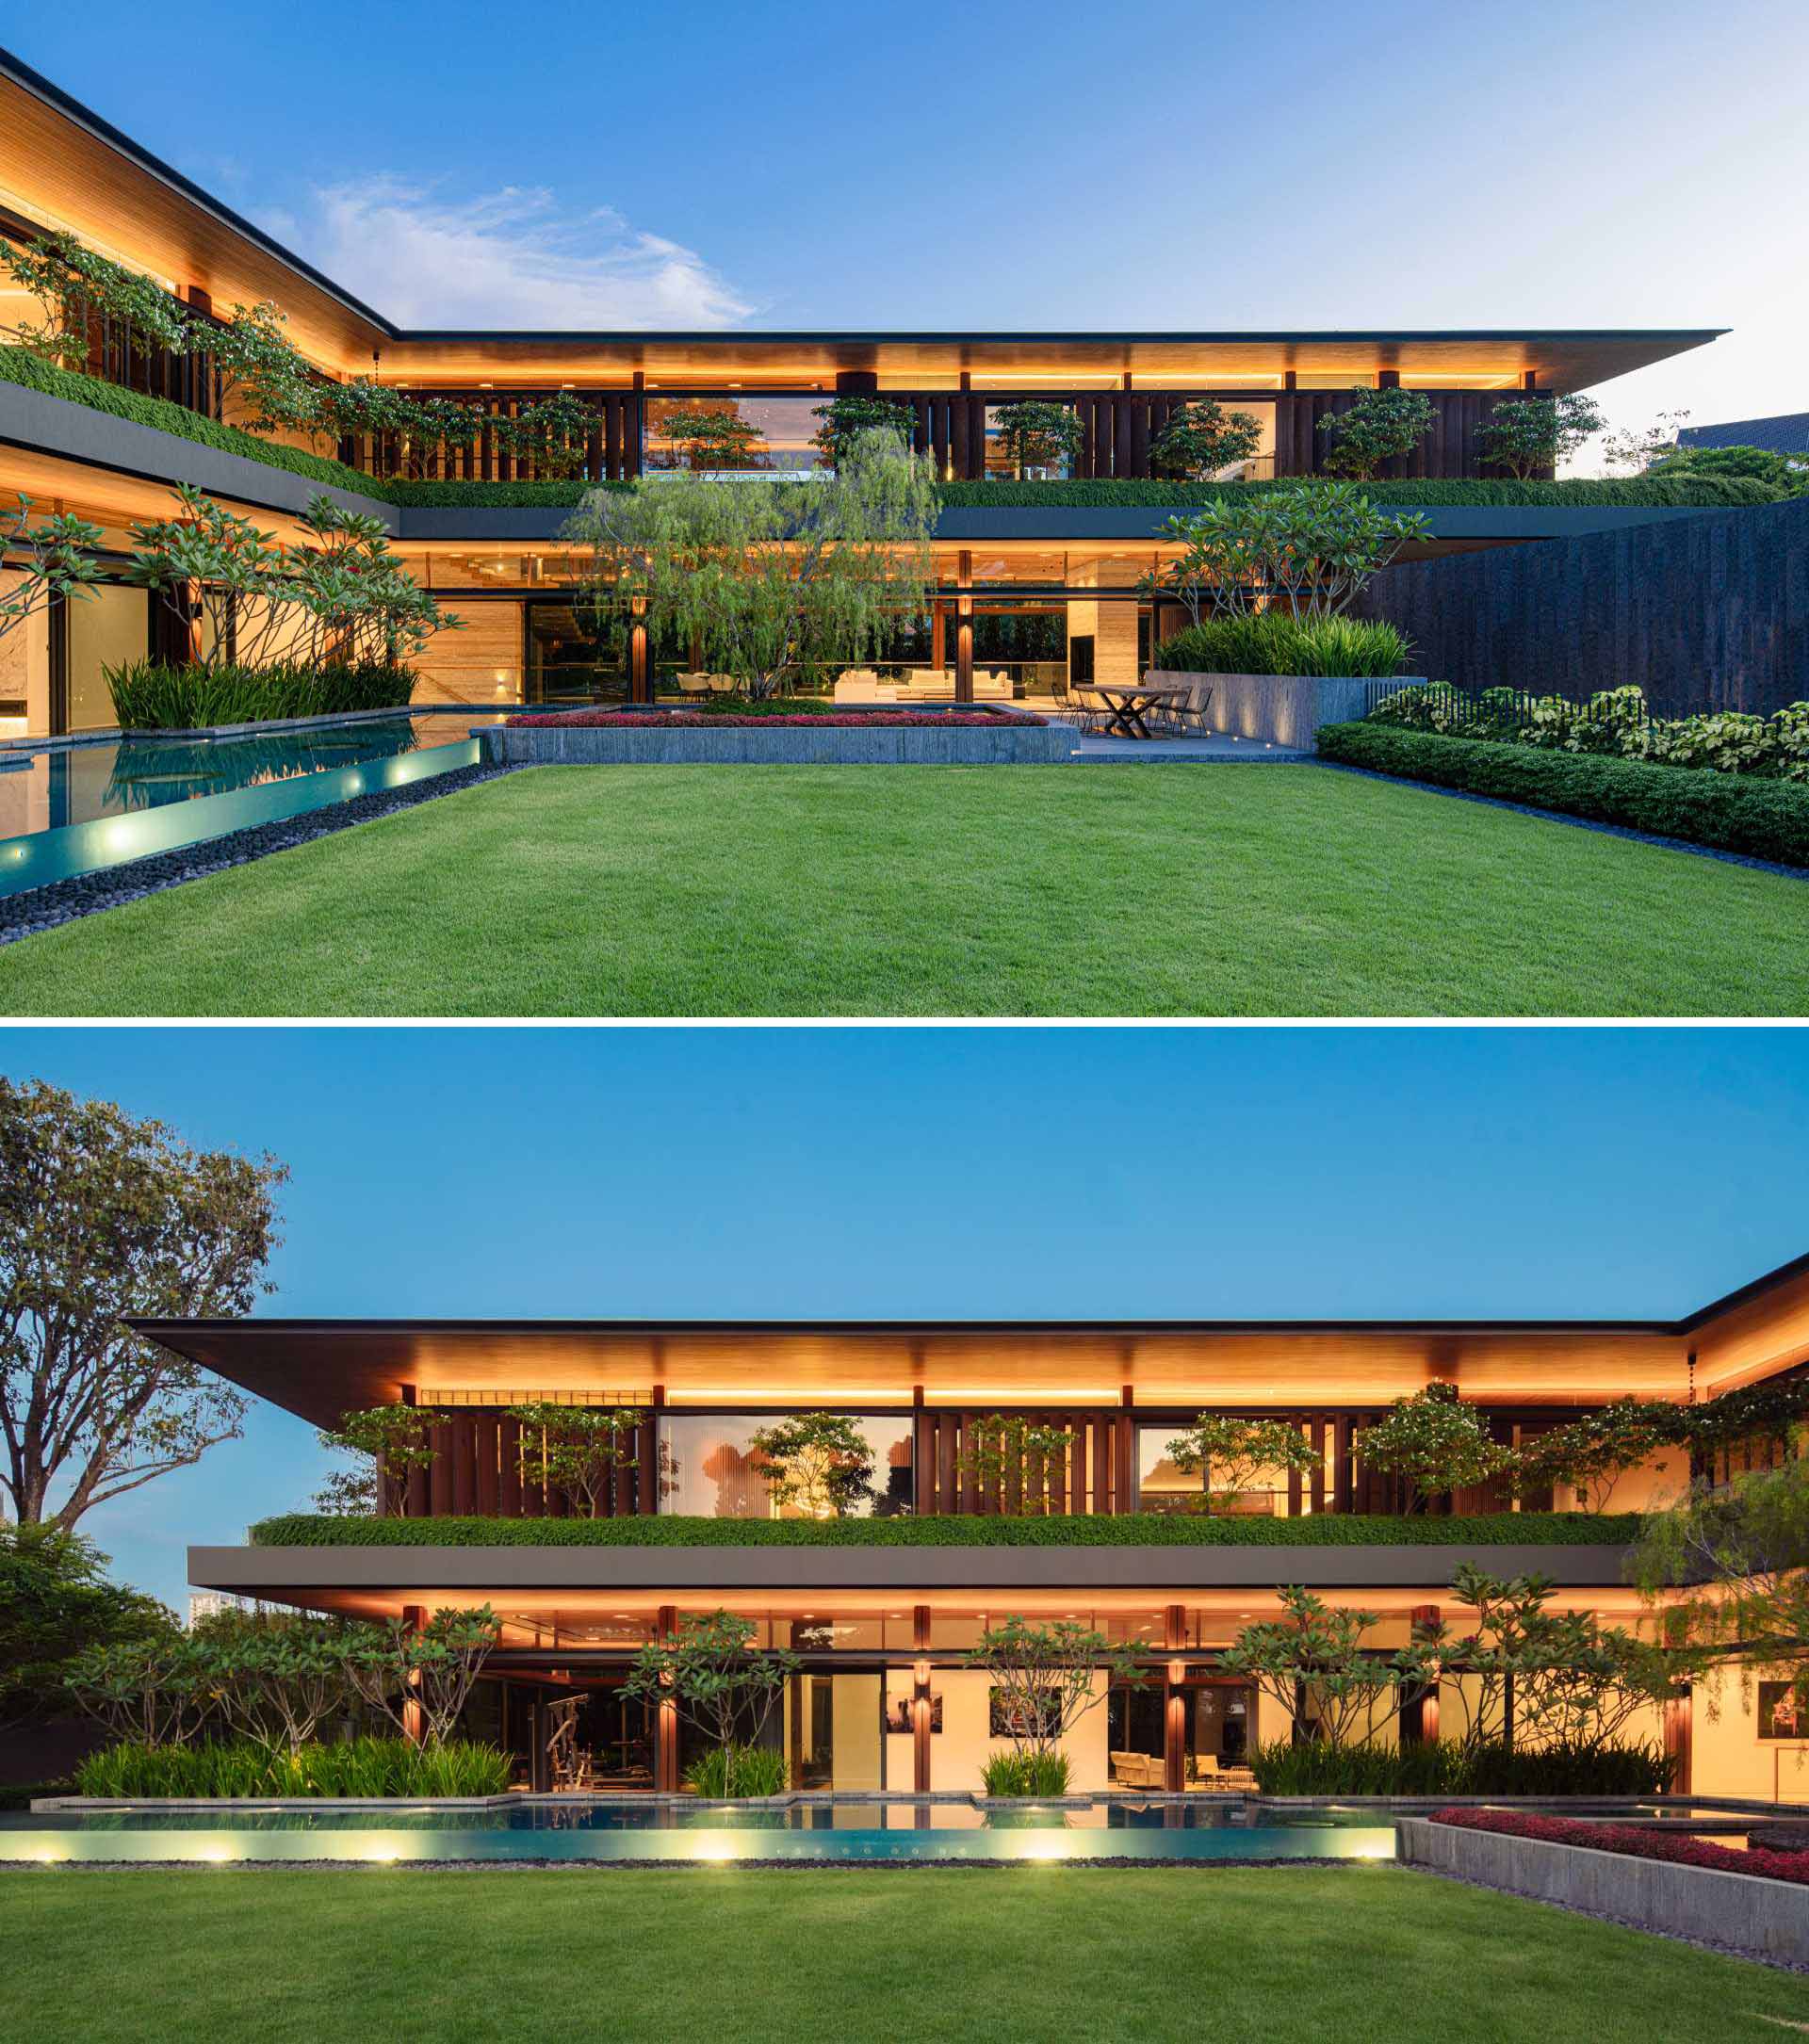 A modern house with an expansive lawn and a 25-meter-long swimming pool in the central garden, creating a secluded and private oasis, while lighting highlights the design of the home at night.